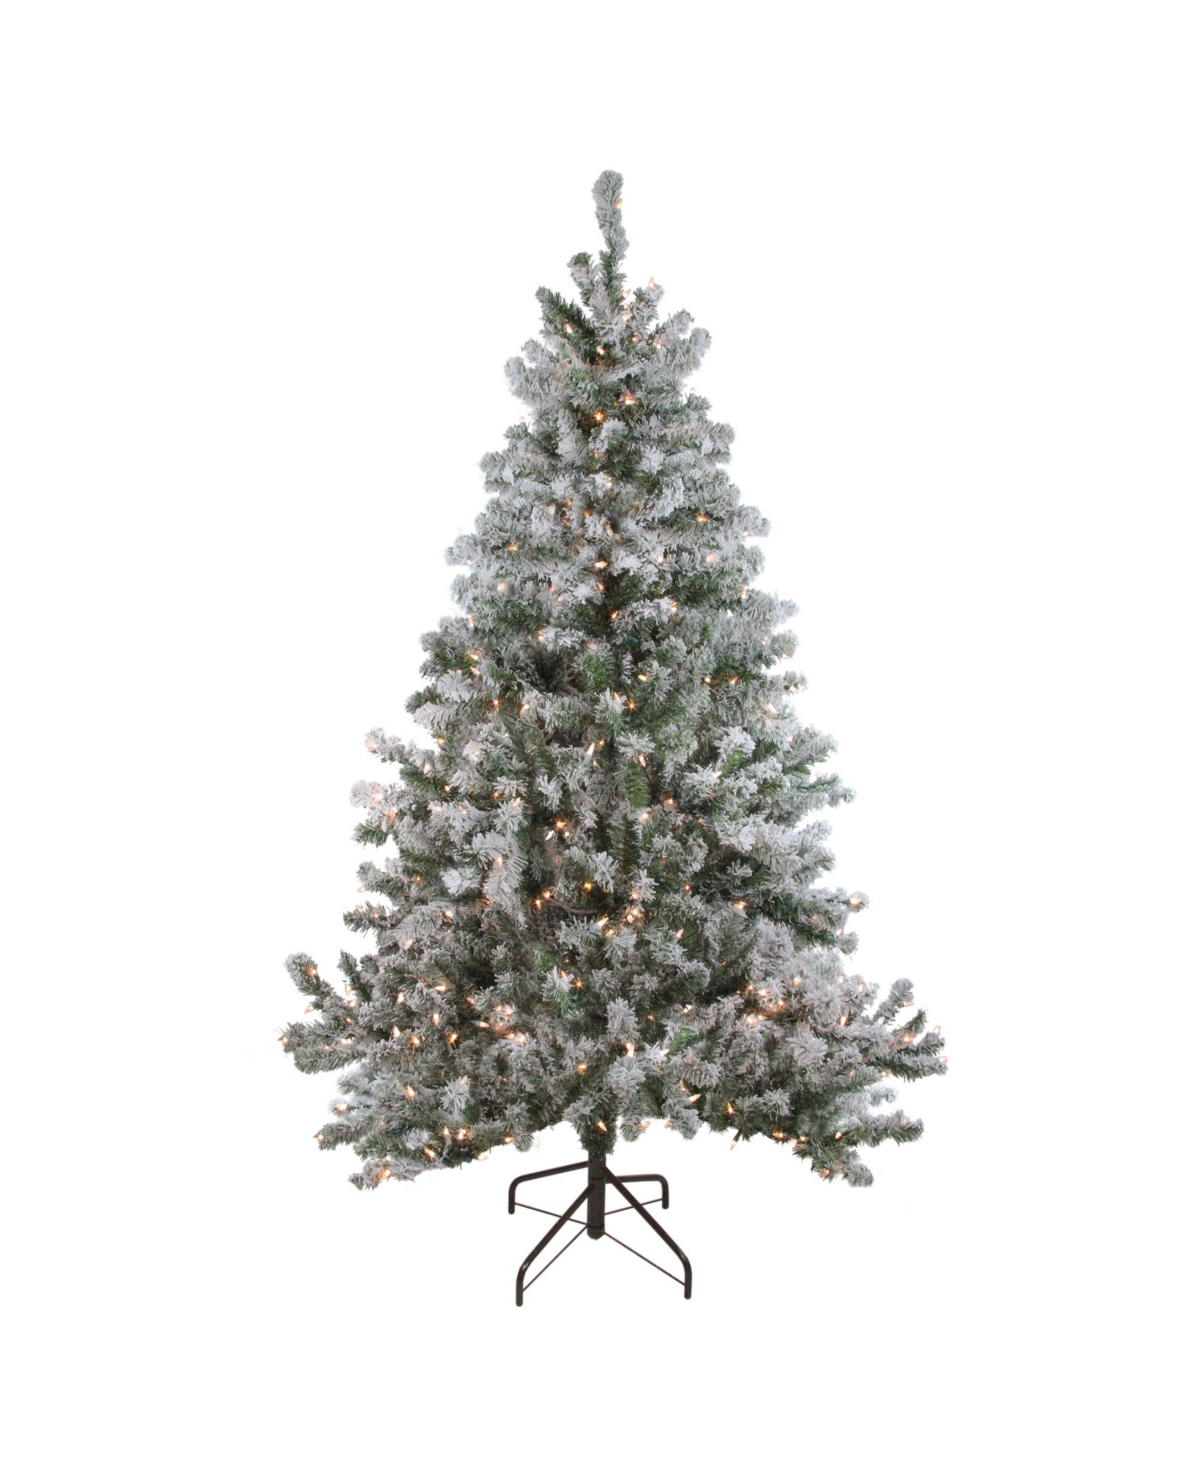 6' Pre-Lit Flocked Balsam Pine Artificial Christmas Tree - Clear Lights - Green